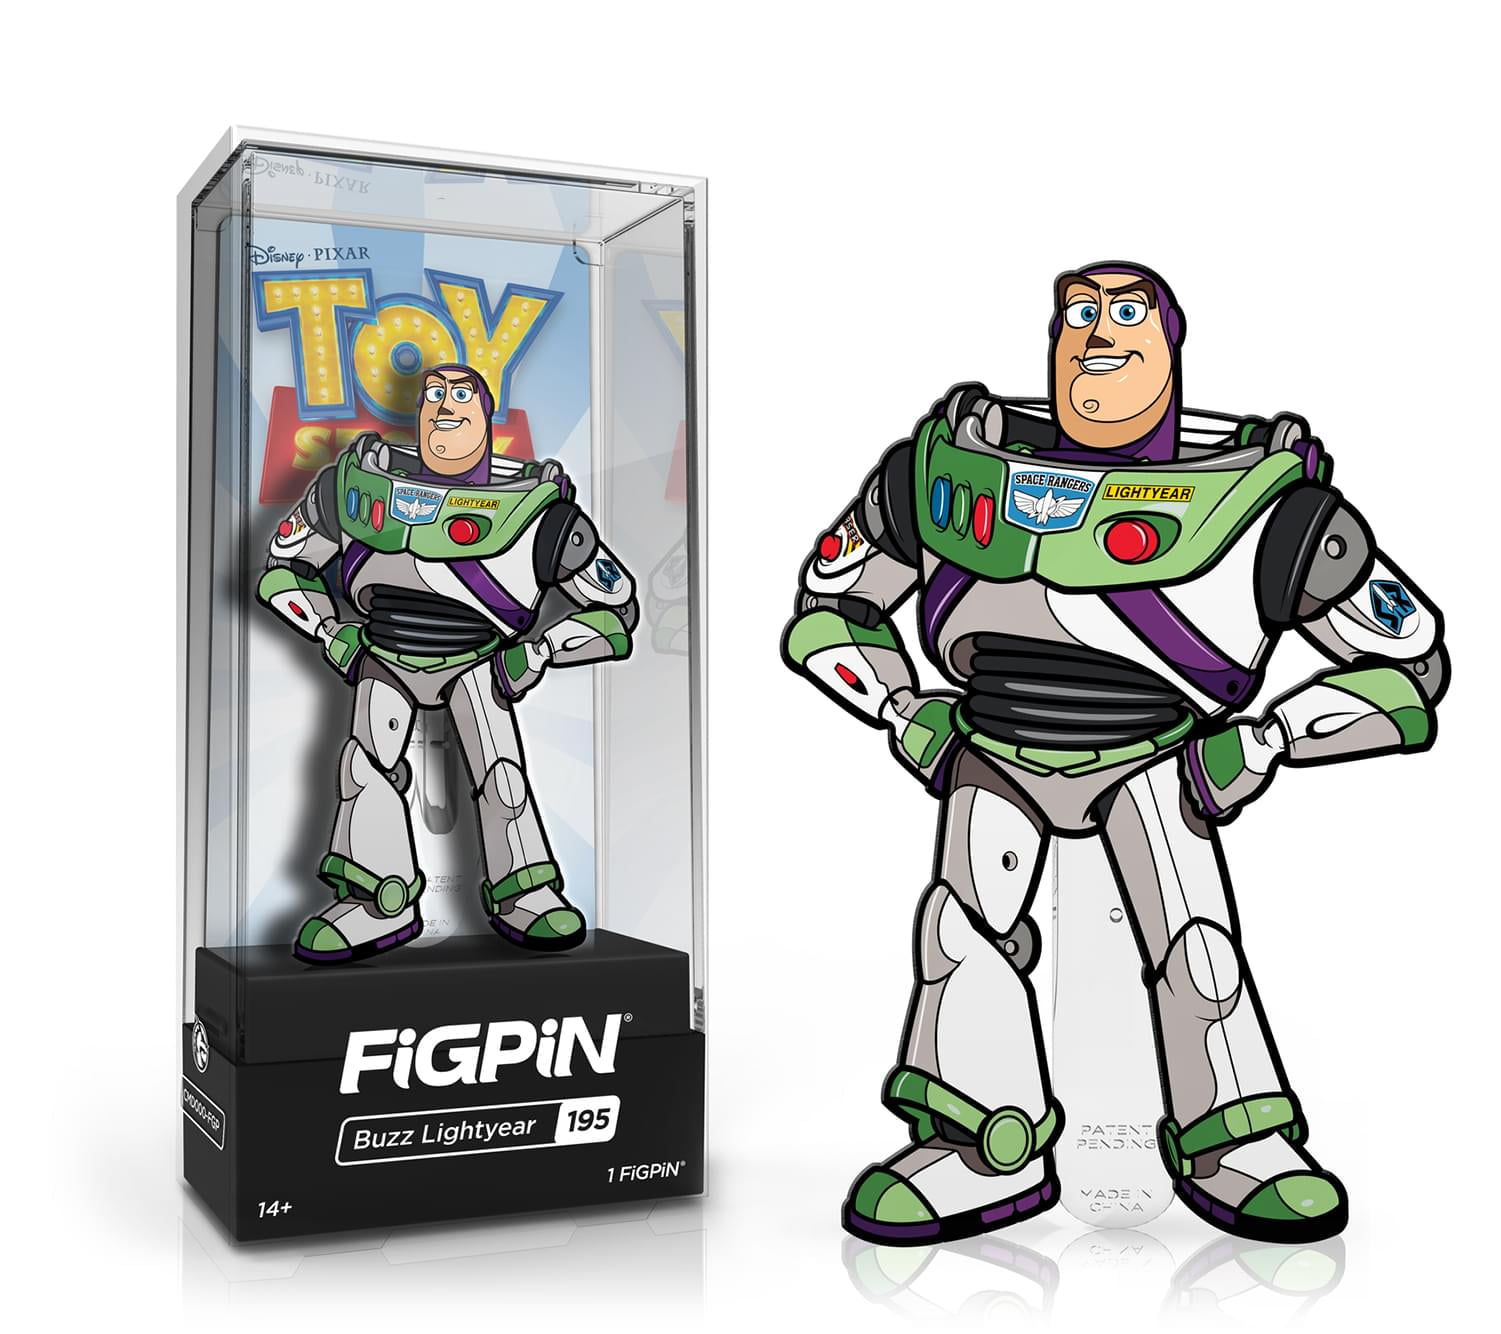 Toy Story 4 FiGPiN BUZZ LIGHTYEAR #195 IN HAND